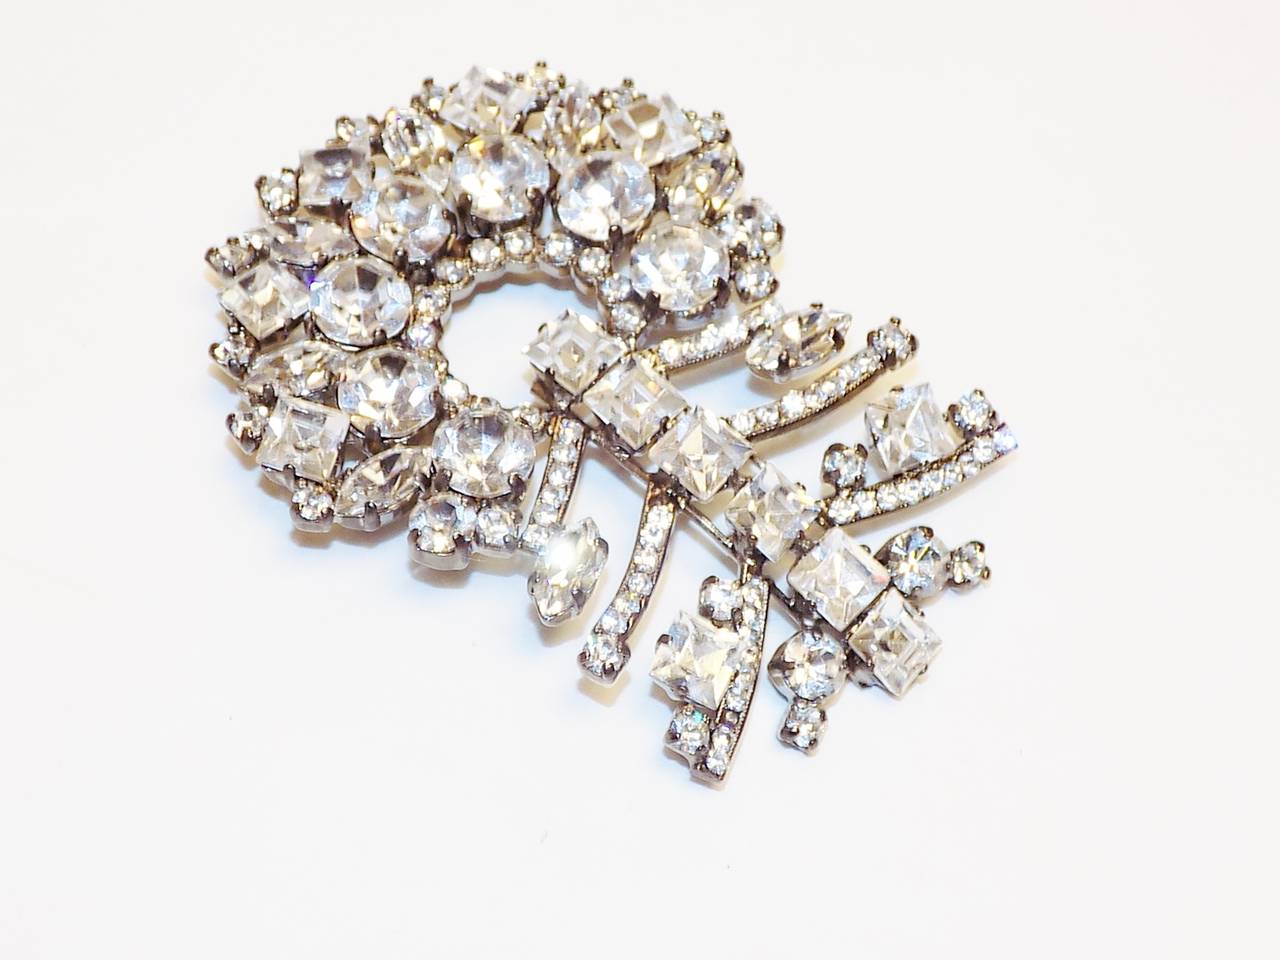 Early Armani hand set with crystal large pin. Stones sparkle like real diamonds. 
Beautiful design. . Brooch is 3 inches long and 2 inches wide